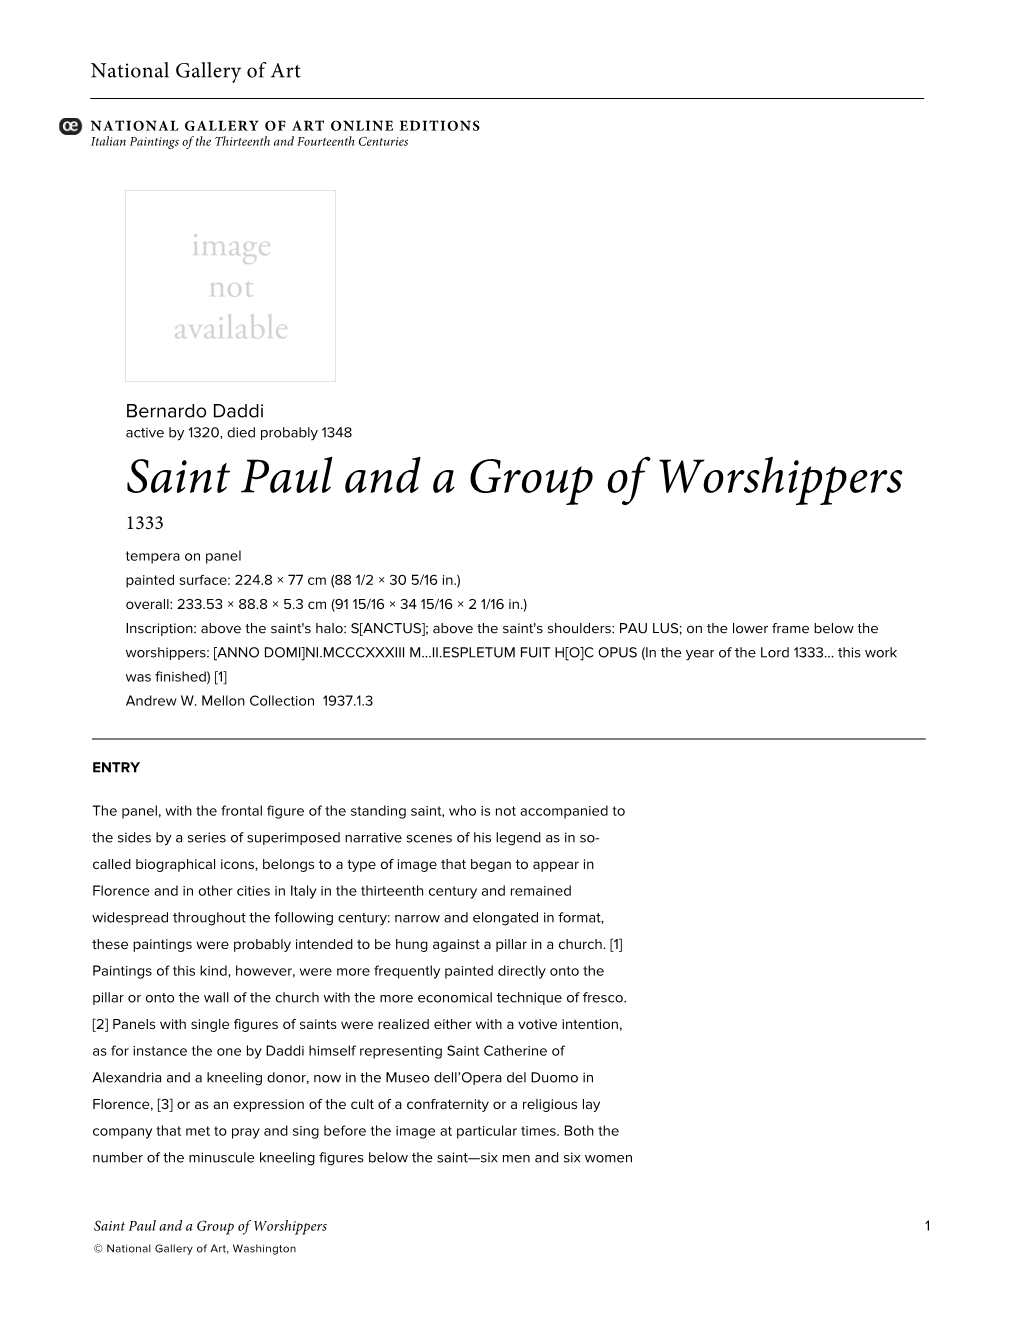 Saint Paul and a Group of Worshippers